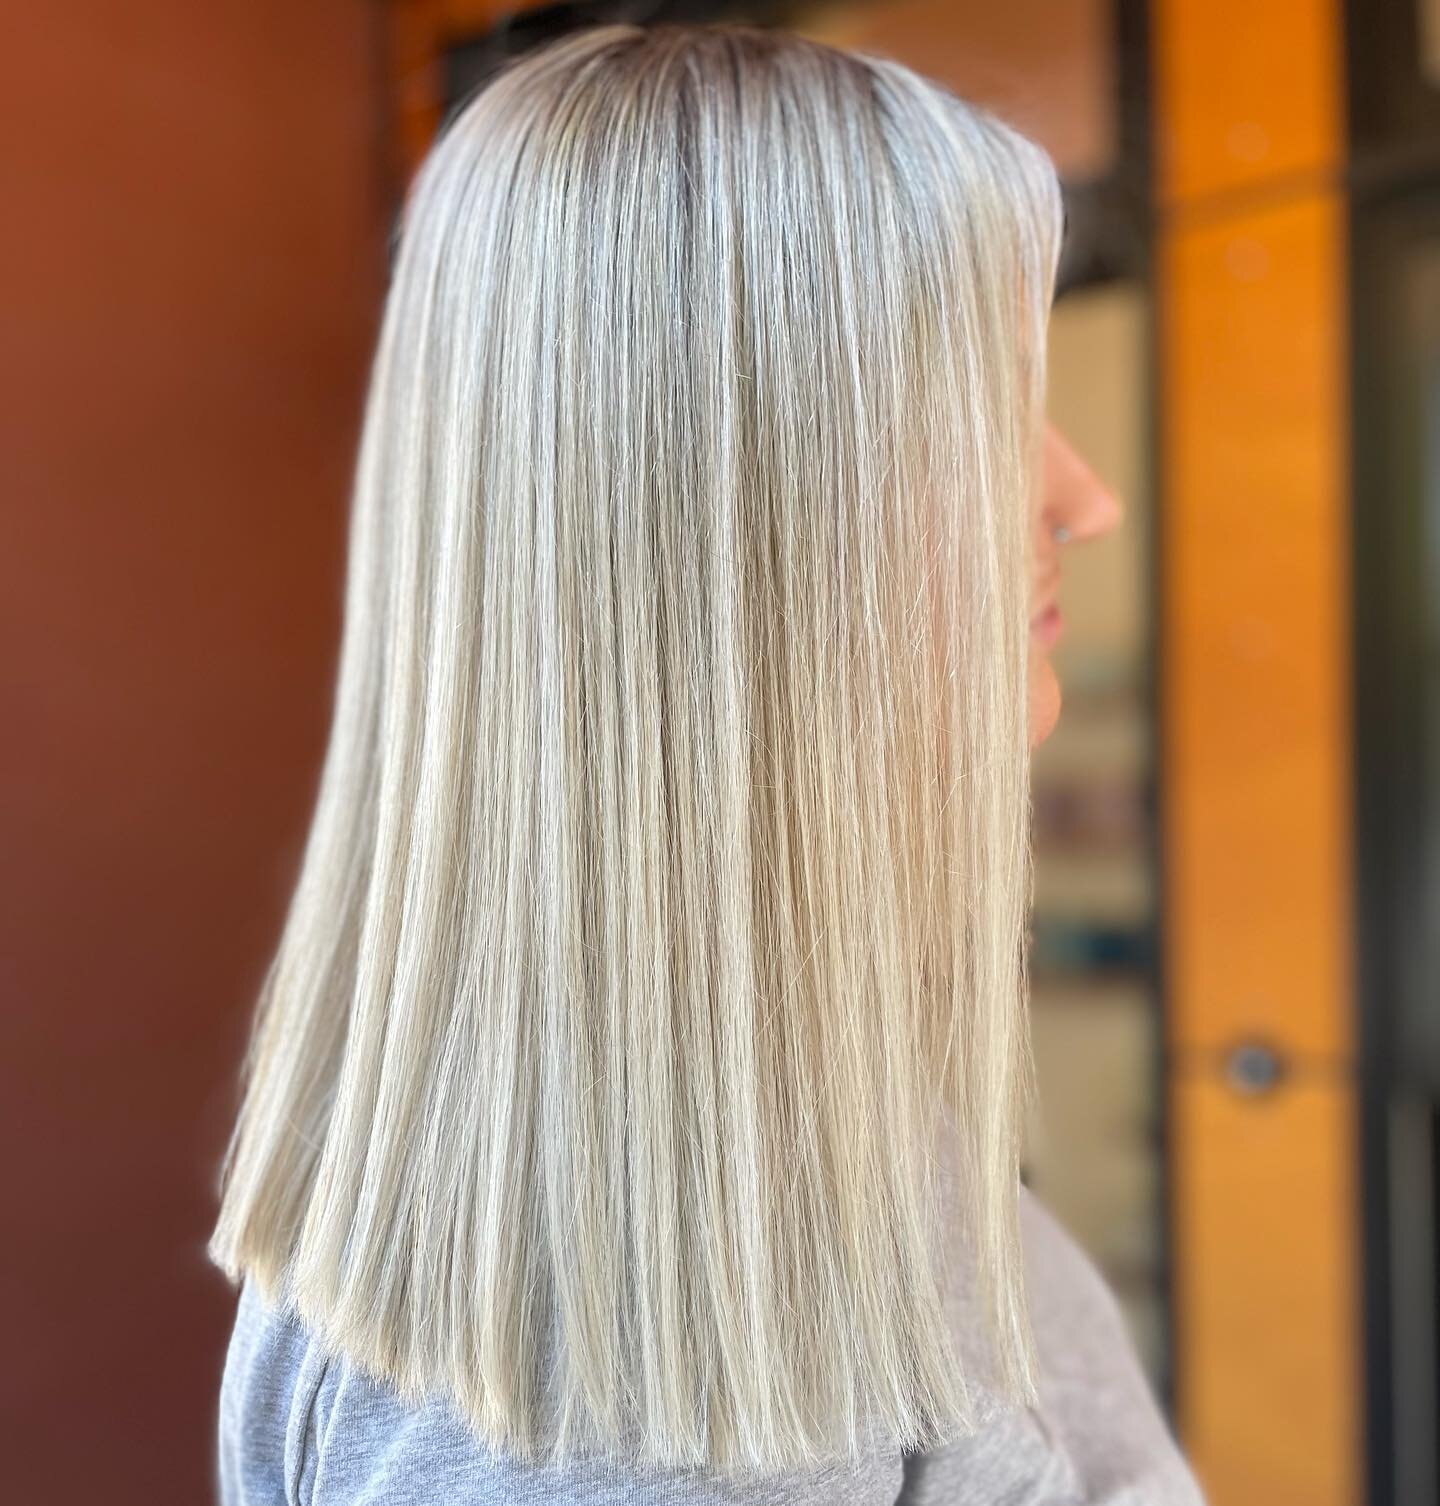 Fresh blonde, fresh chop &amp; a fresh maskless face.. couldn&rsquo;t ask for more 🥲
.
.
Text or DM me to book an appointment!
.
.
503.560.6363
.
.
#hairbyruthstrauss #coteriesalonpdx #portlandhairstylist #pdxhairstylist #behindthechair #balayage #b